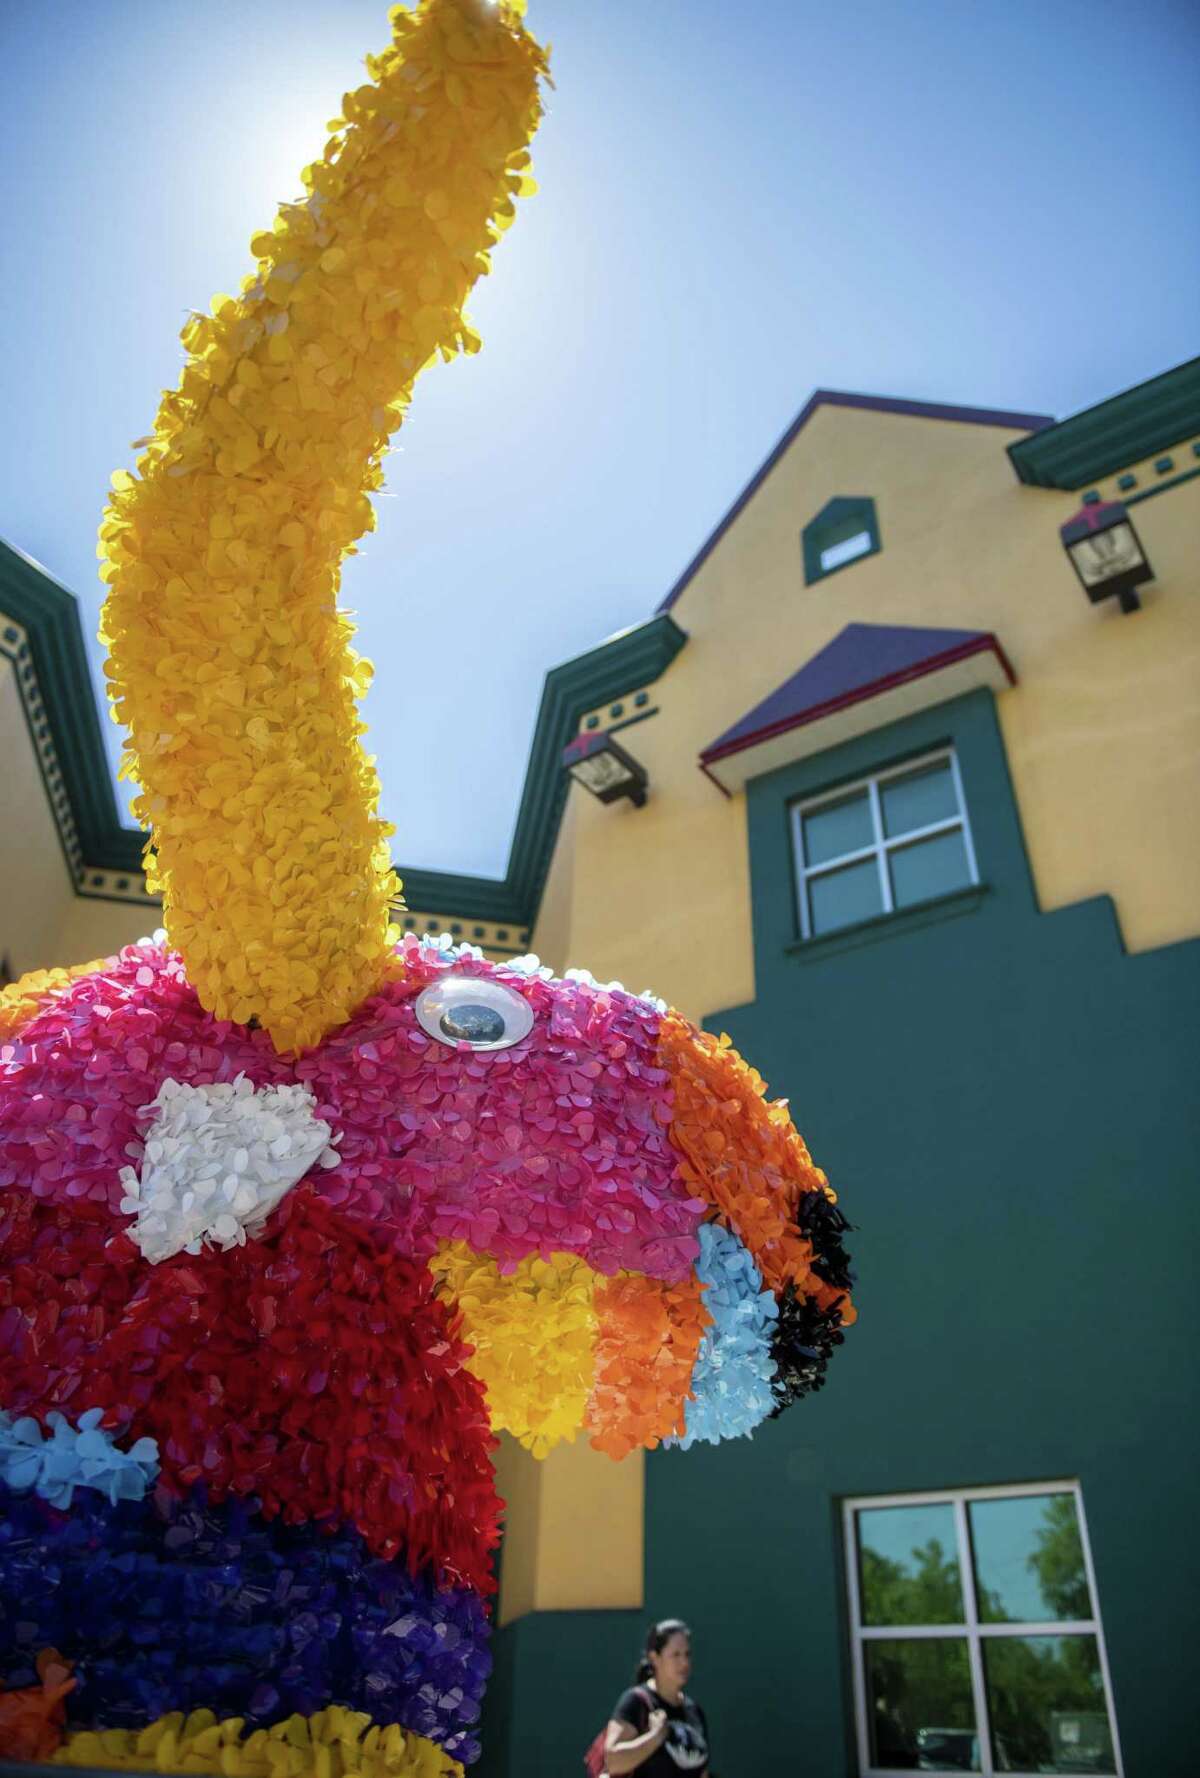 Titto the Bull was featured during Piñatas in the Barrio, an all-day Fiesta event at Plaza Guadalupe on Saturday, April 20th, 2019.